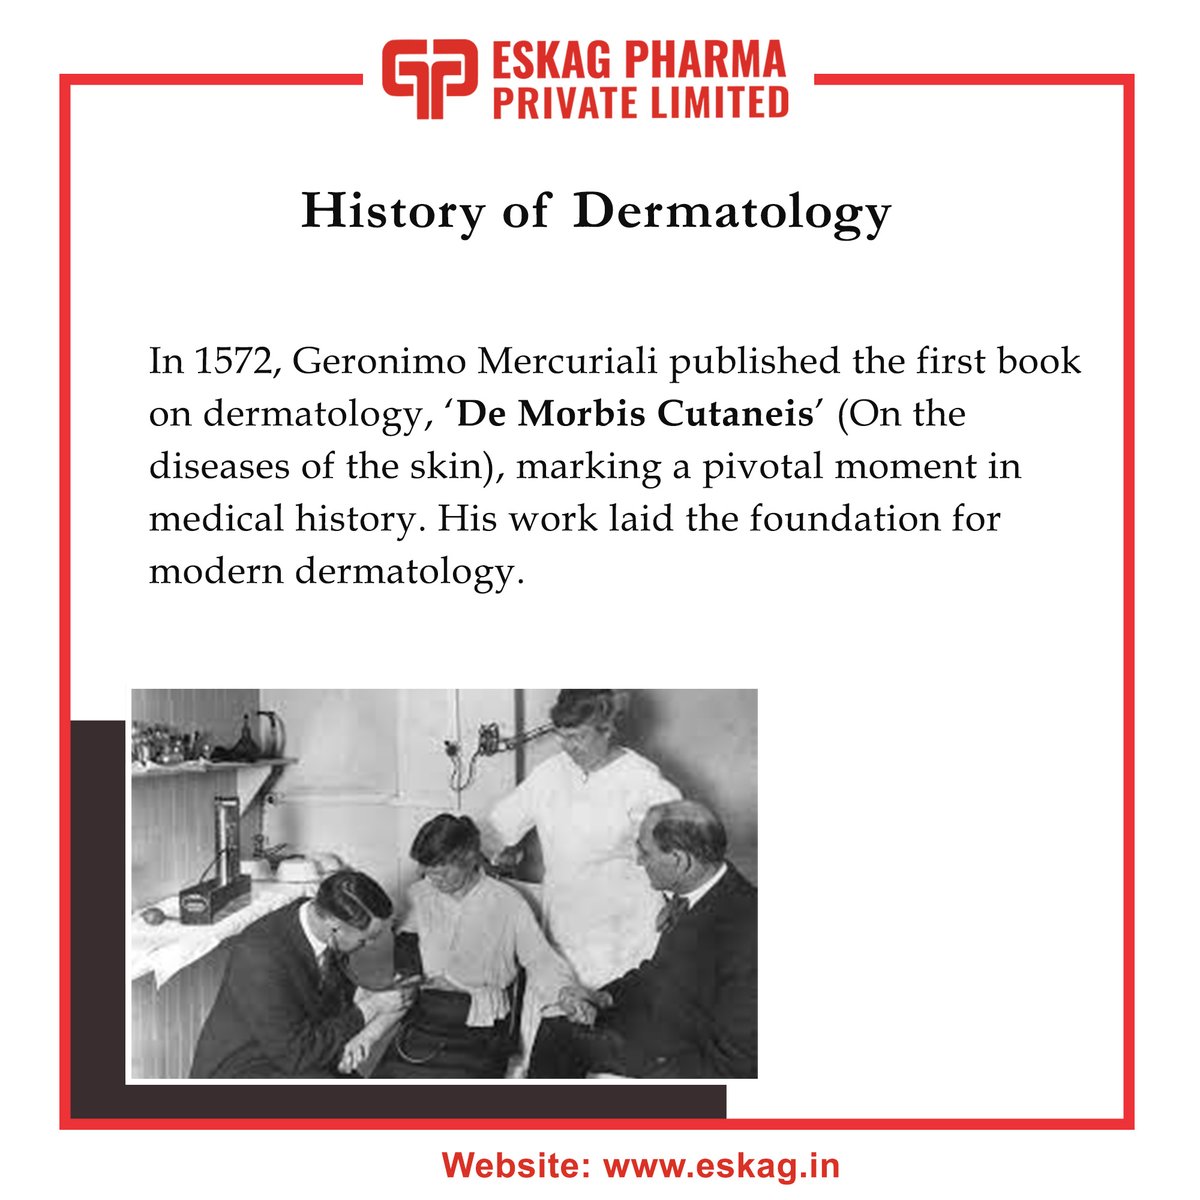 Follow us and stay with us to get more such information about History of Dermatology.👍

#history #dermatology #dermatologist  #geronimomercuriali #DermatologyExperts #moderndermatology #demorbiscutaneis #medicalstudent #medicalhistory #EskahPharma #researchanddevelopment